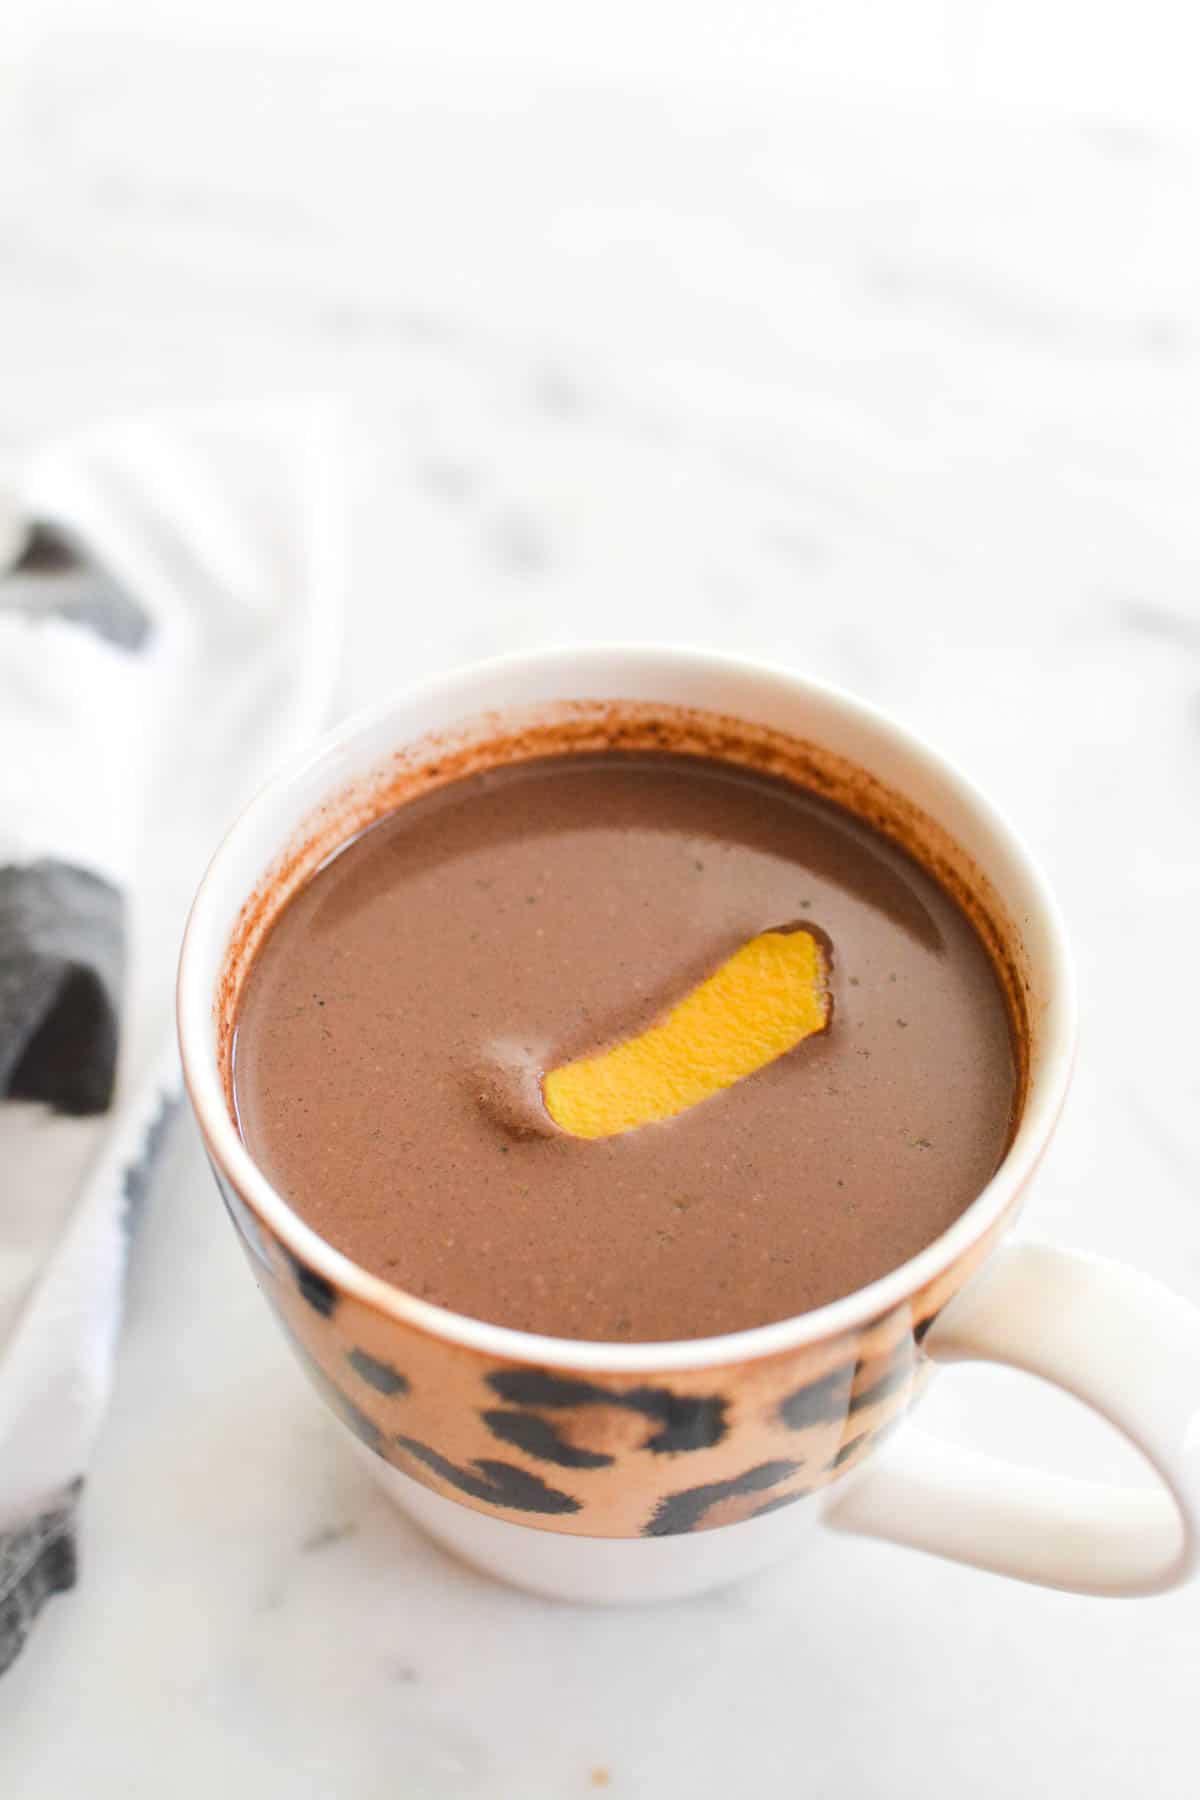 Mug of hot cocoa on a counter with a piece of orange peel on top.